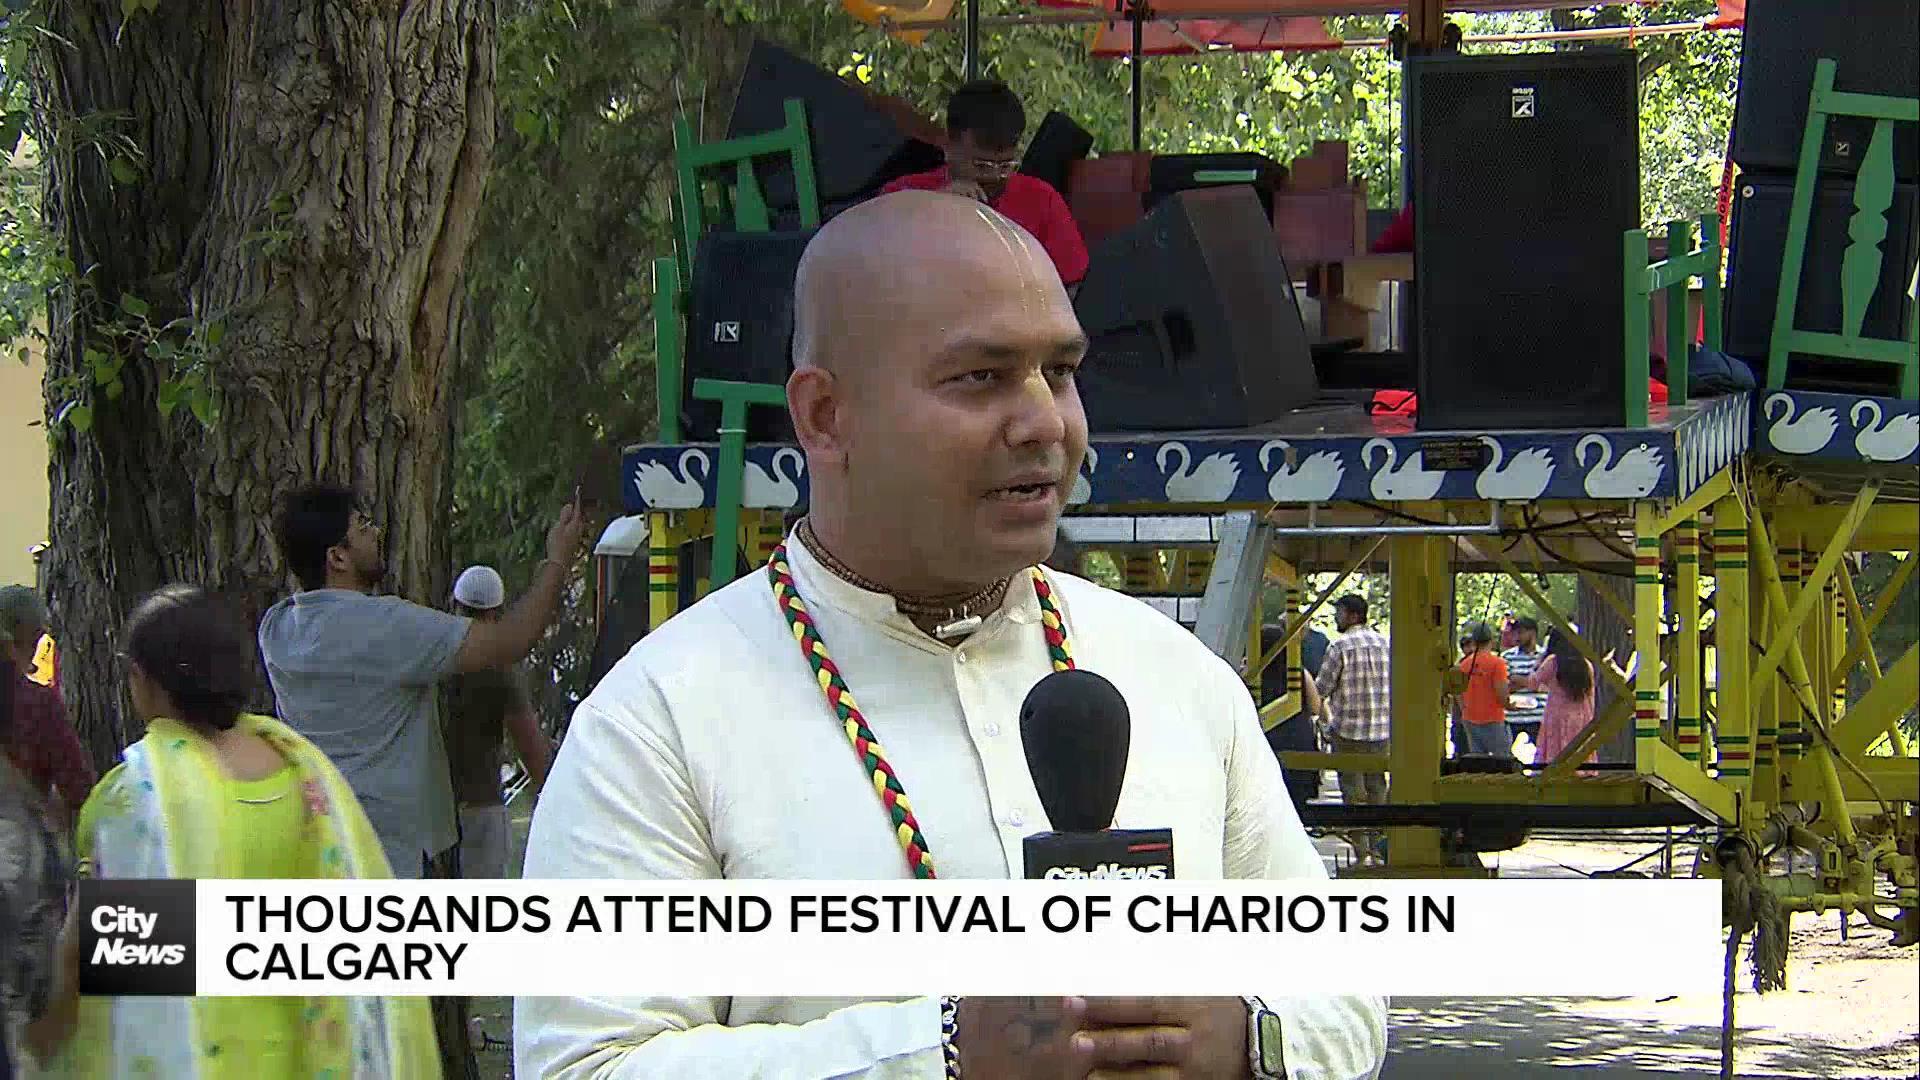 Thousands attend festival of chariots in Calgary